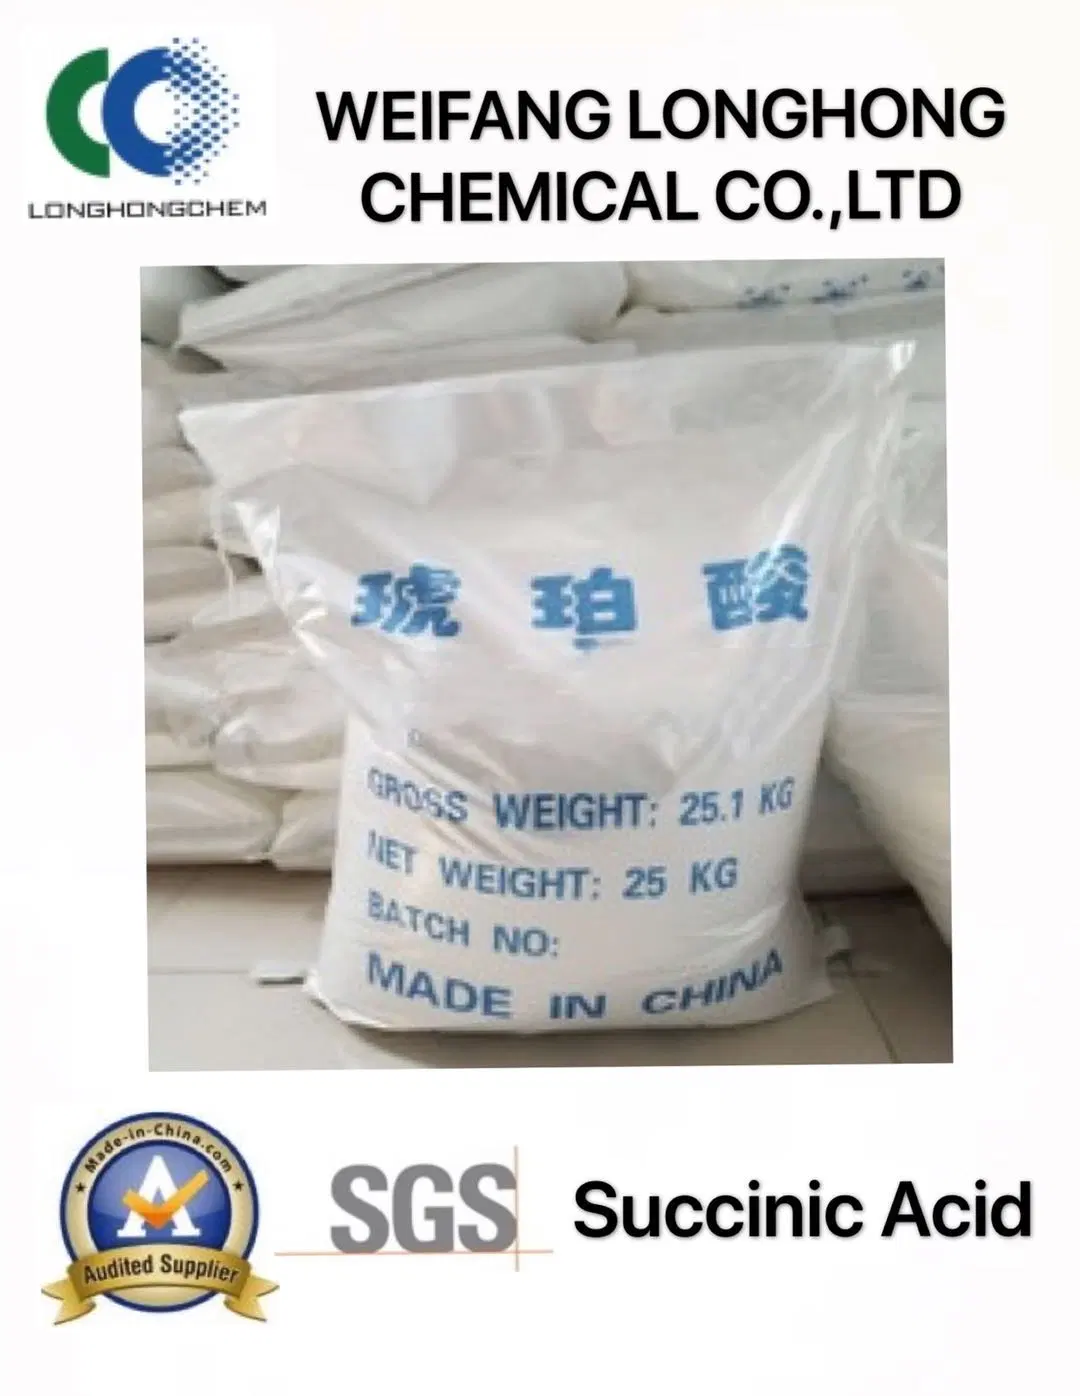 All Biodegradable Succinic Acid Widely Used in Surfactant Industry CAS No. 110-15-6